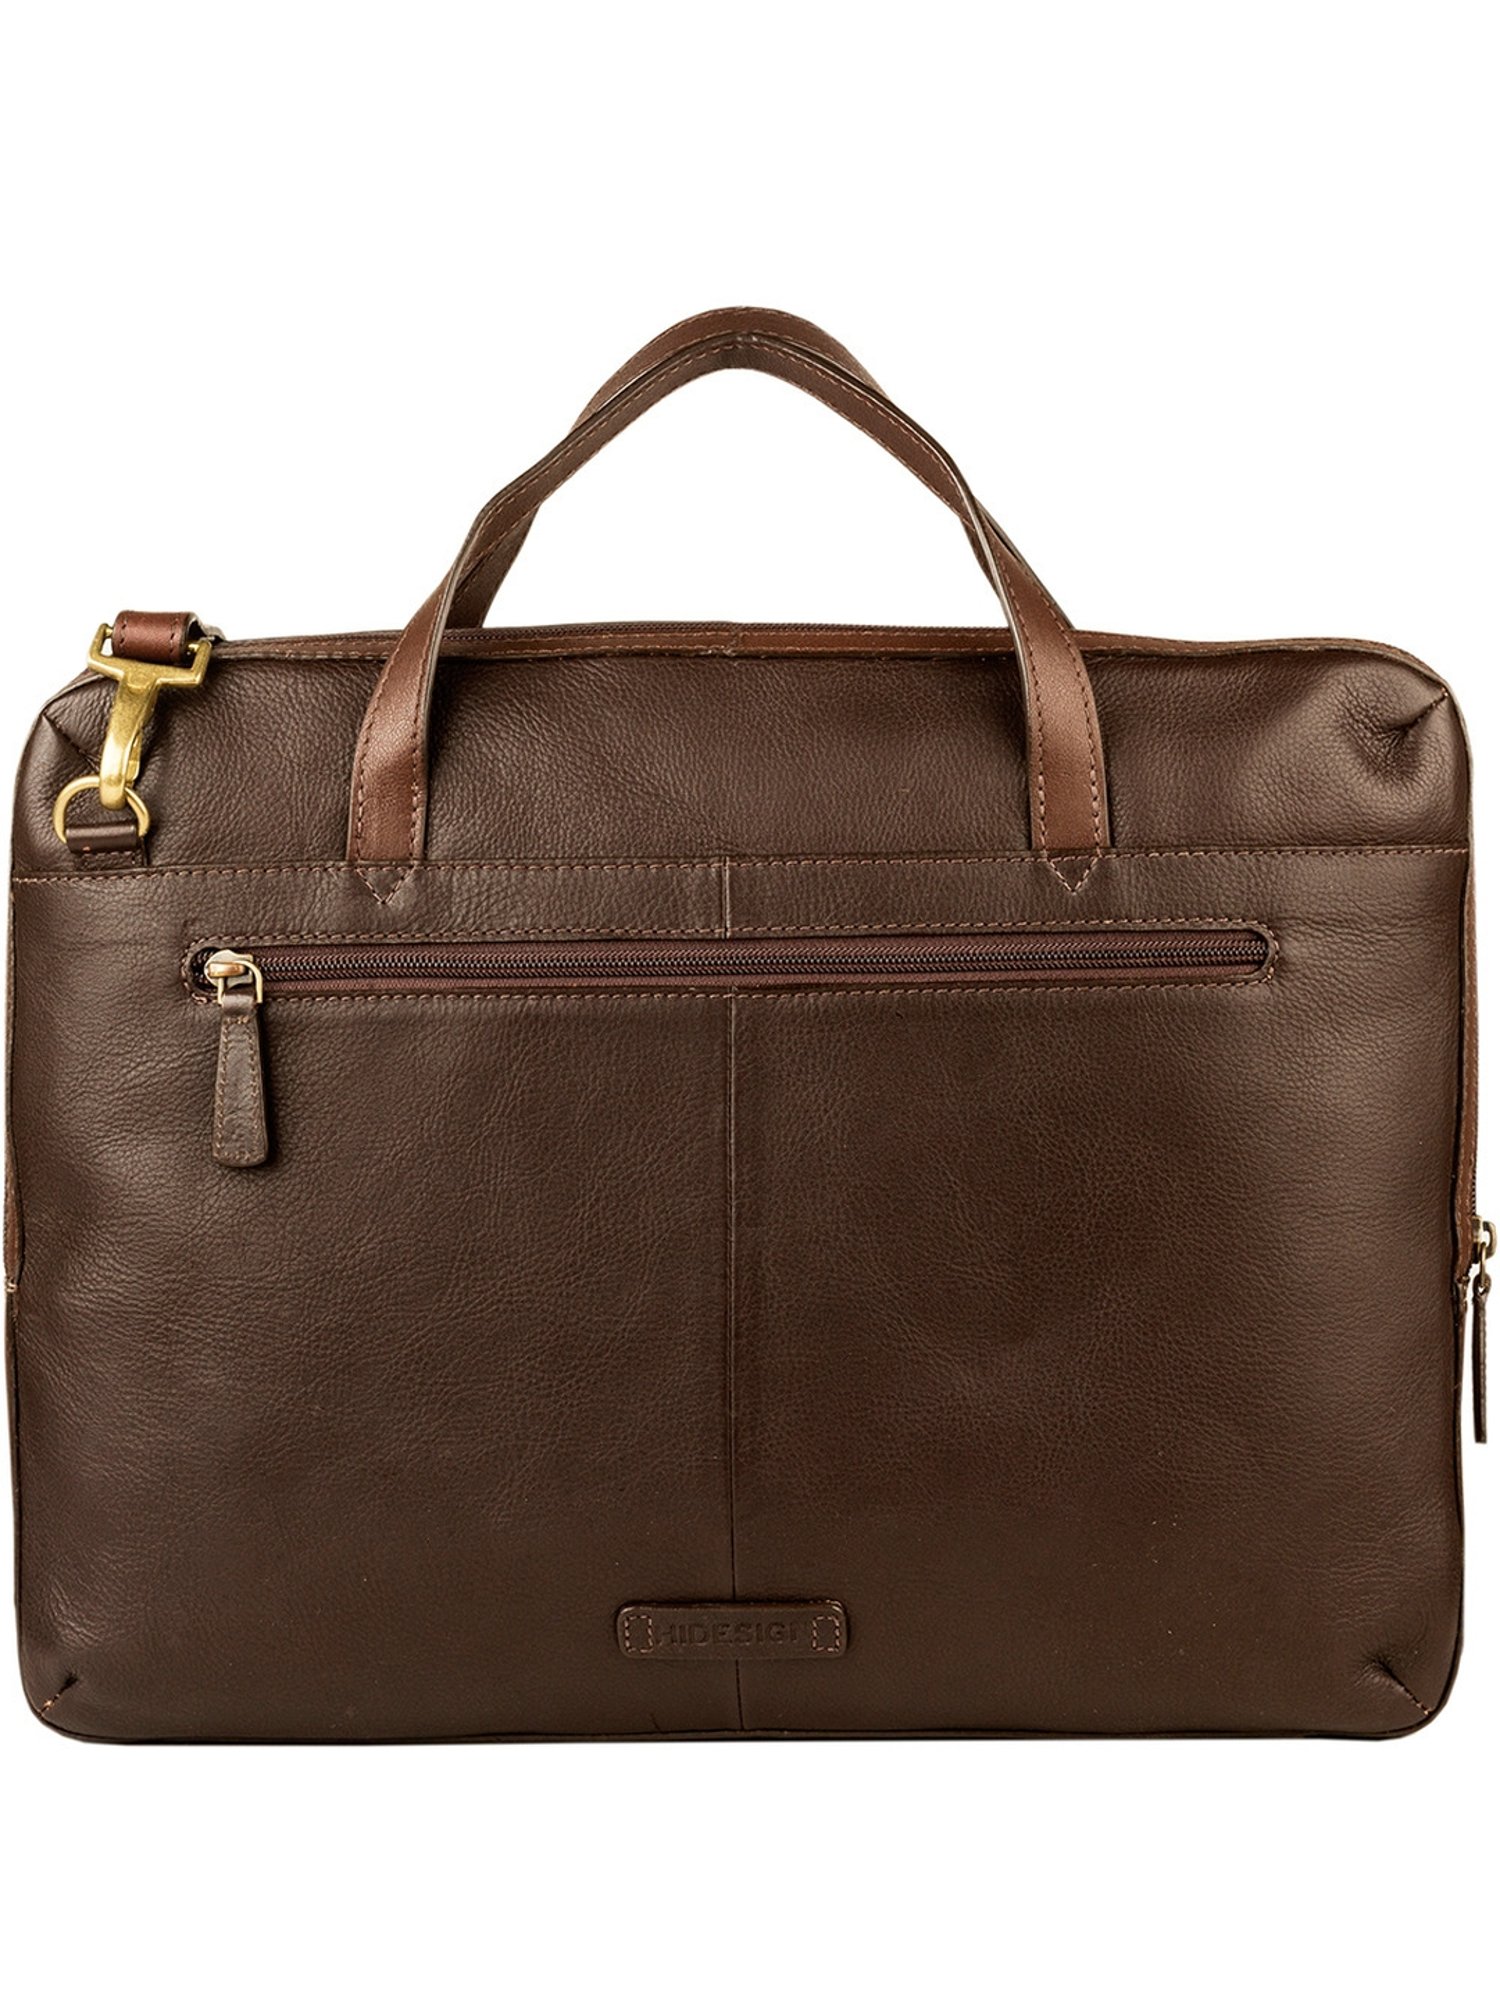 Buy Hidesign Laptop Bags Online In India At Best Price Offers | Tata CLiQ